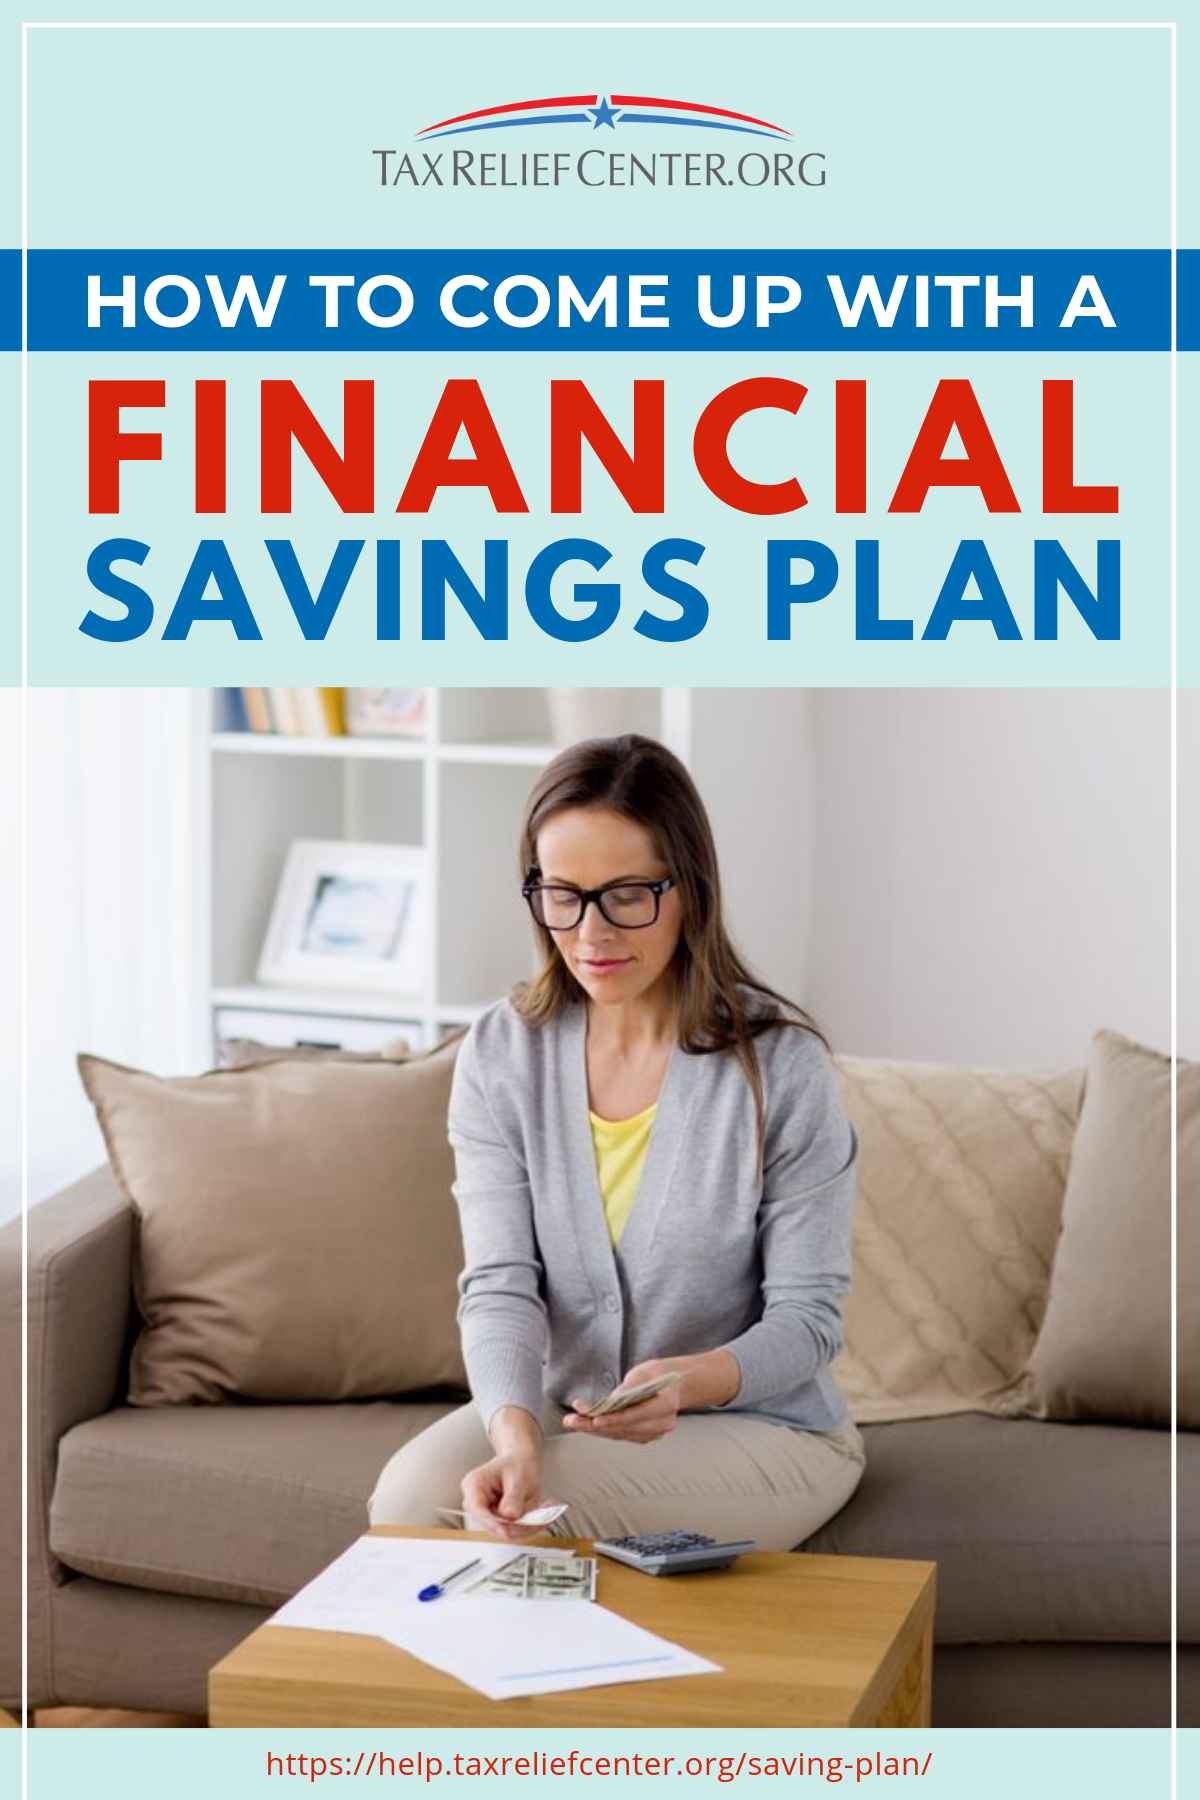 How To Come Up With A Financial Savings Plan https://help.taxreliefcenter.org/saving-plan/